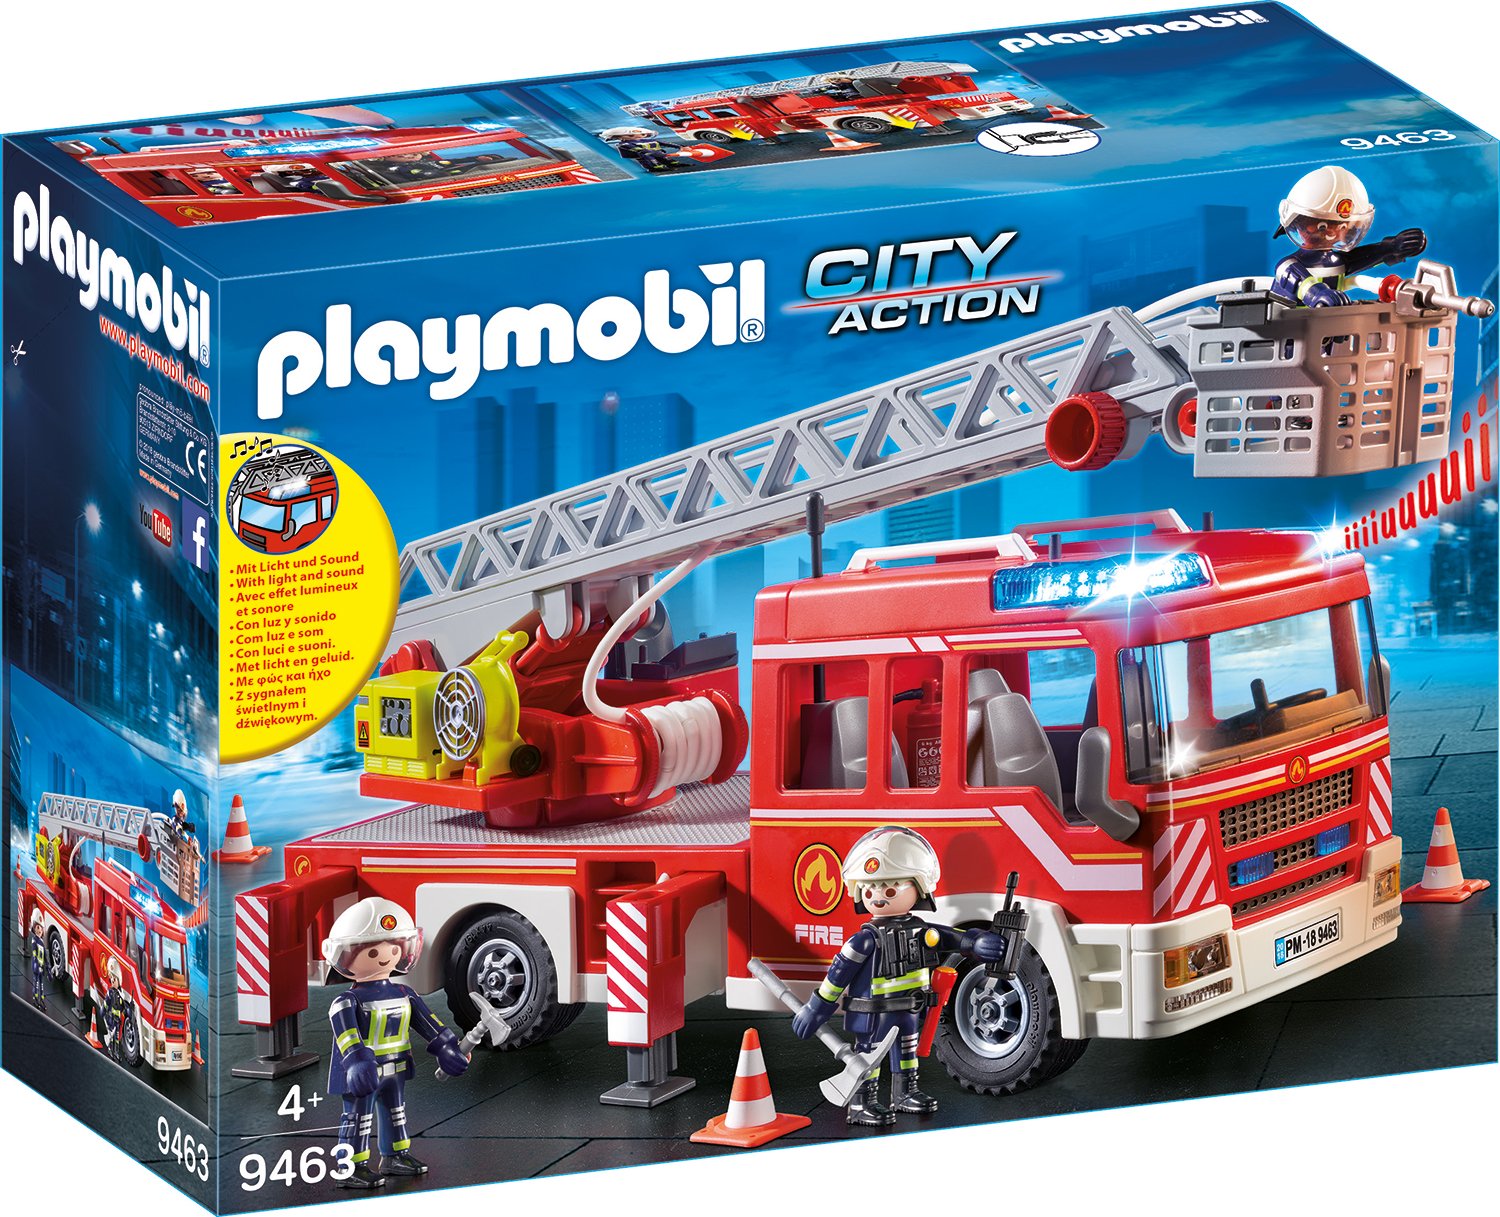 Playmobil Toy Fire Engine Ladder Vehicle